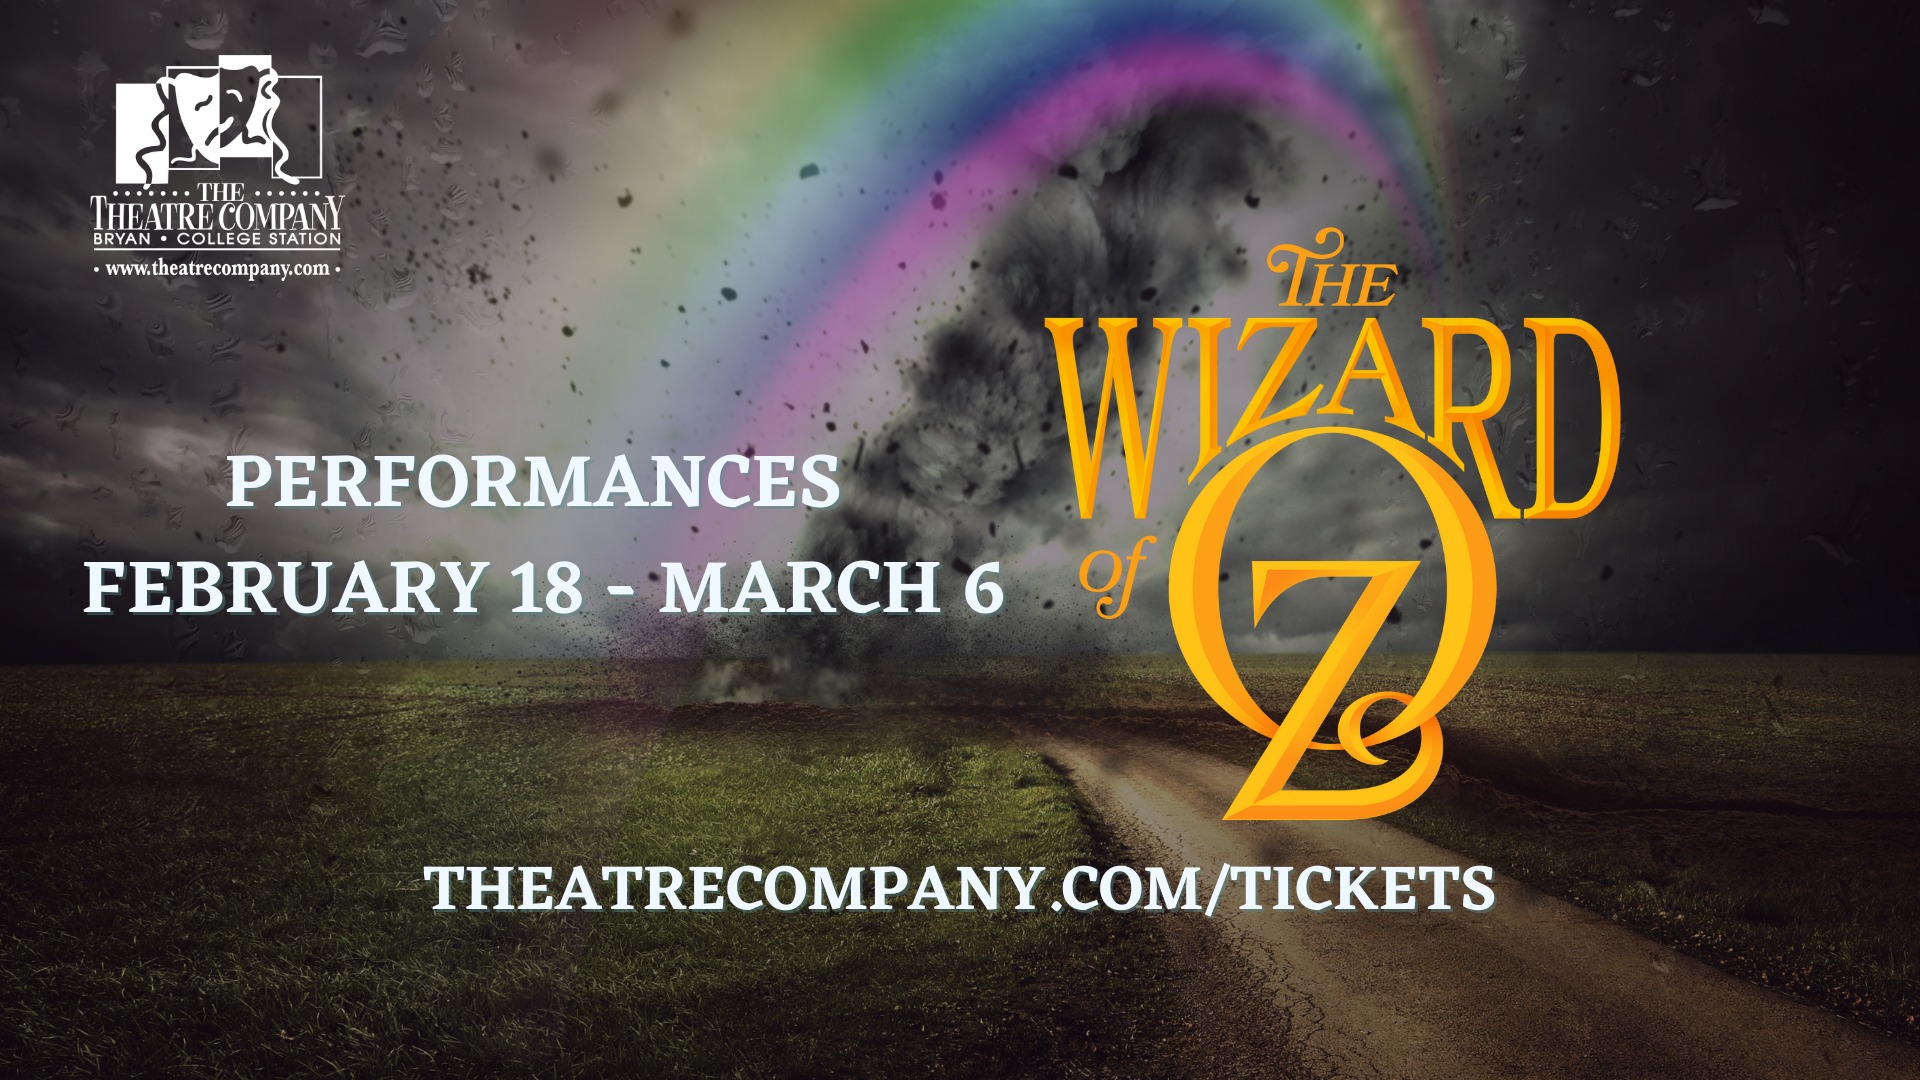 The Wizard of Oz by The Theatre Company (TTC)